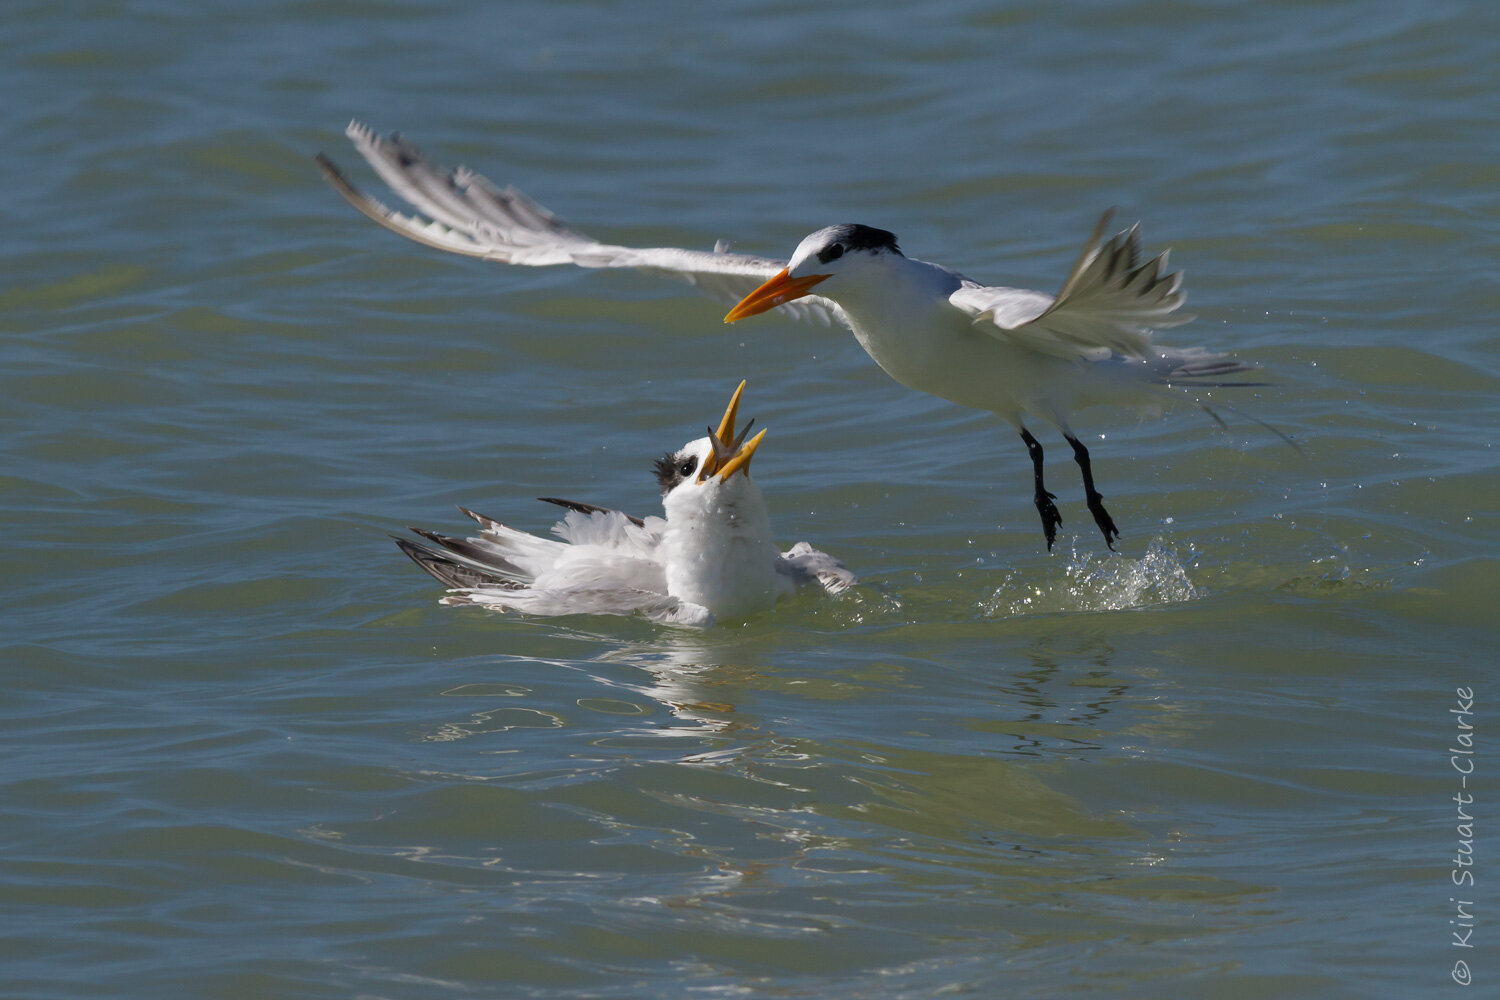  Royal tern taking off after feeding young 